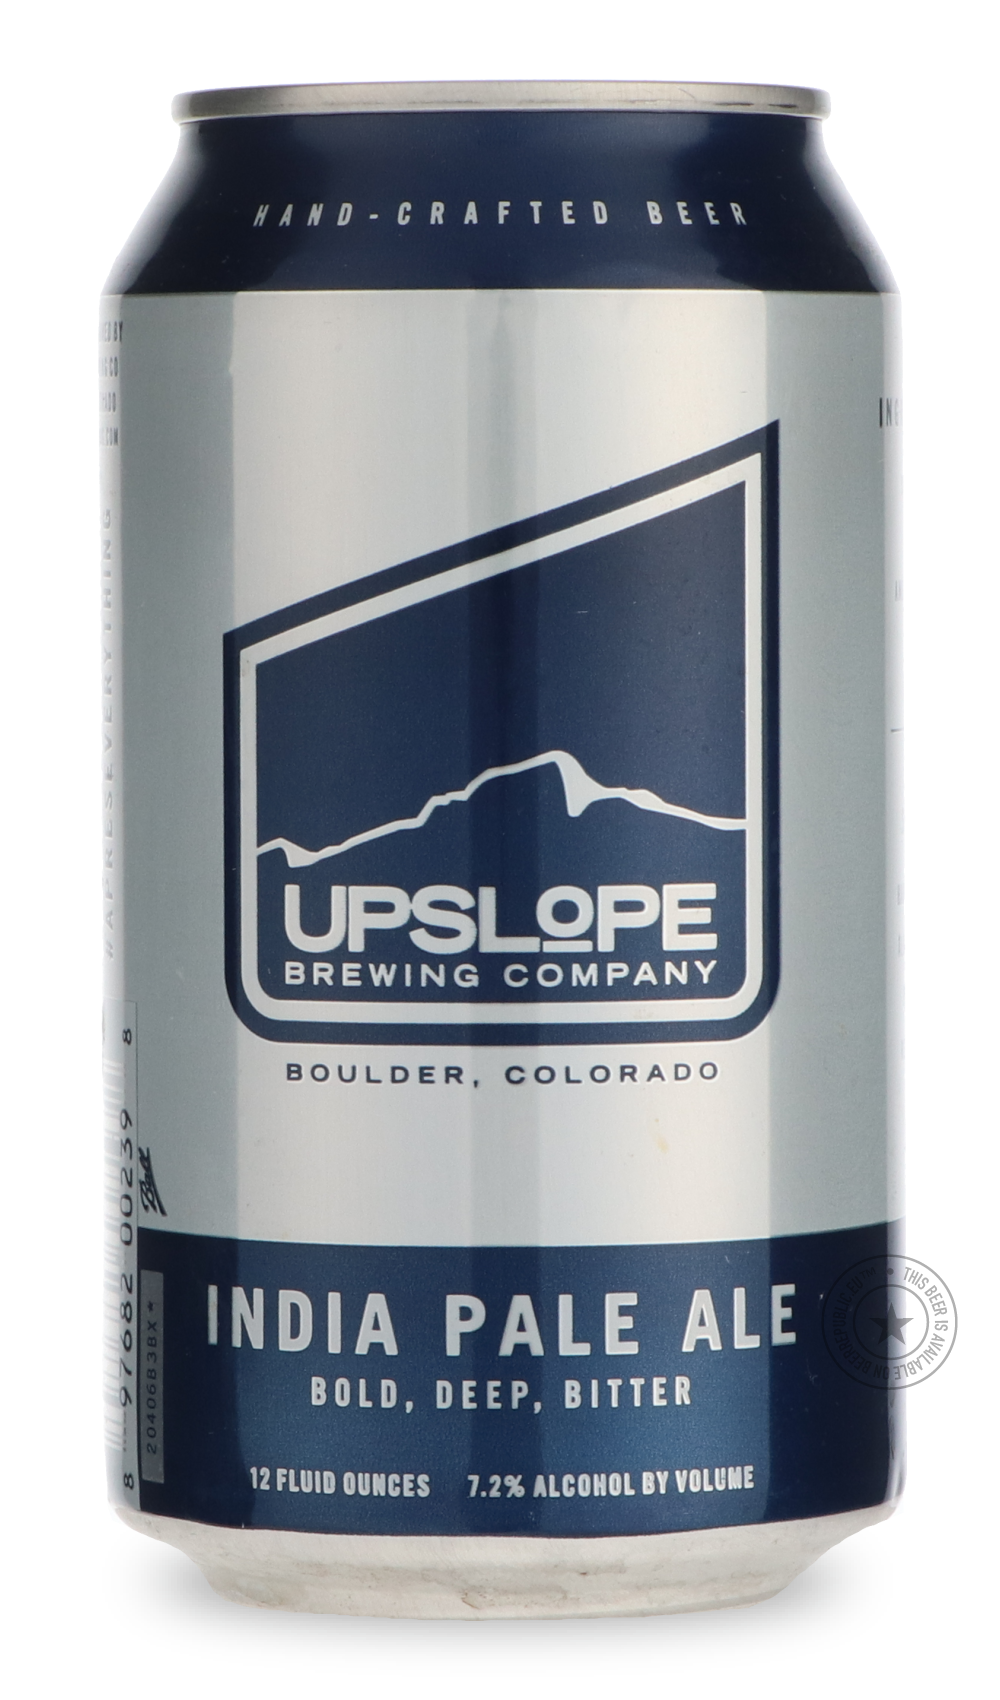 -Upslope- India Pale Ale-IPA- Only @ Beer Republic - The best online beer store for American & Canadian craft beer - Buy beer online from the USA and Canada - Bier online kopen - Amerikaans bier kopen - Craft beer store - Craft beer kopen - Amerikanisch bier kaufen - Bier online kaufen - Acheter biere online - IPA - Stout - Porter - New England IPA - Hazy IPA - Imperial Stout - Barrel Aged - Barrel Aged Imperial Stout - Brown - Dark beer - Blond - Blonde - Pilsner - Lager - Wheat - Weizen - Amber - Barley W